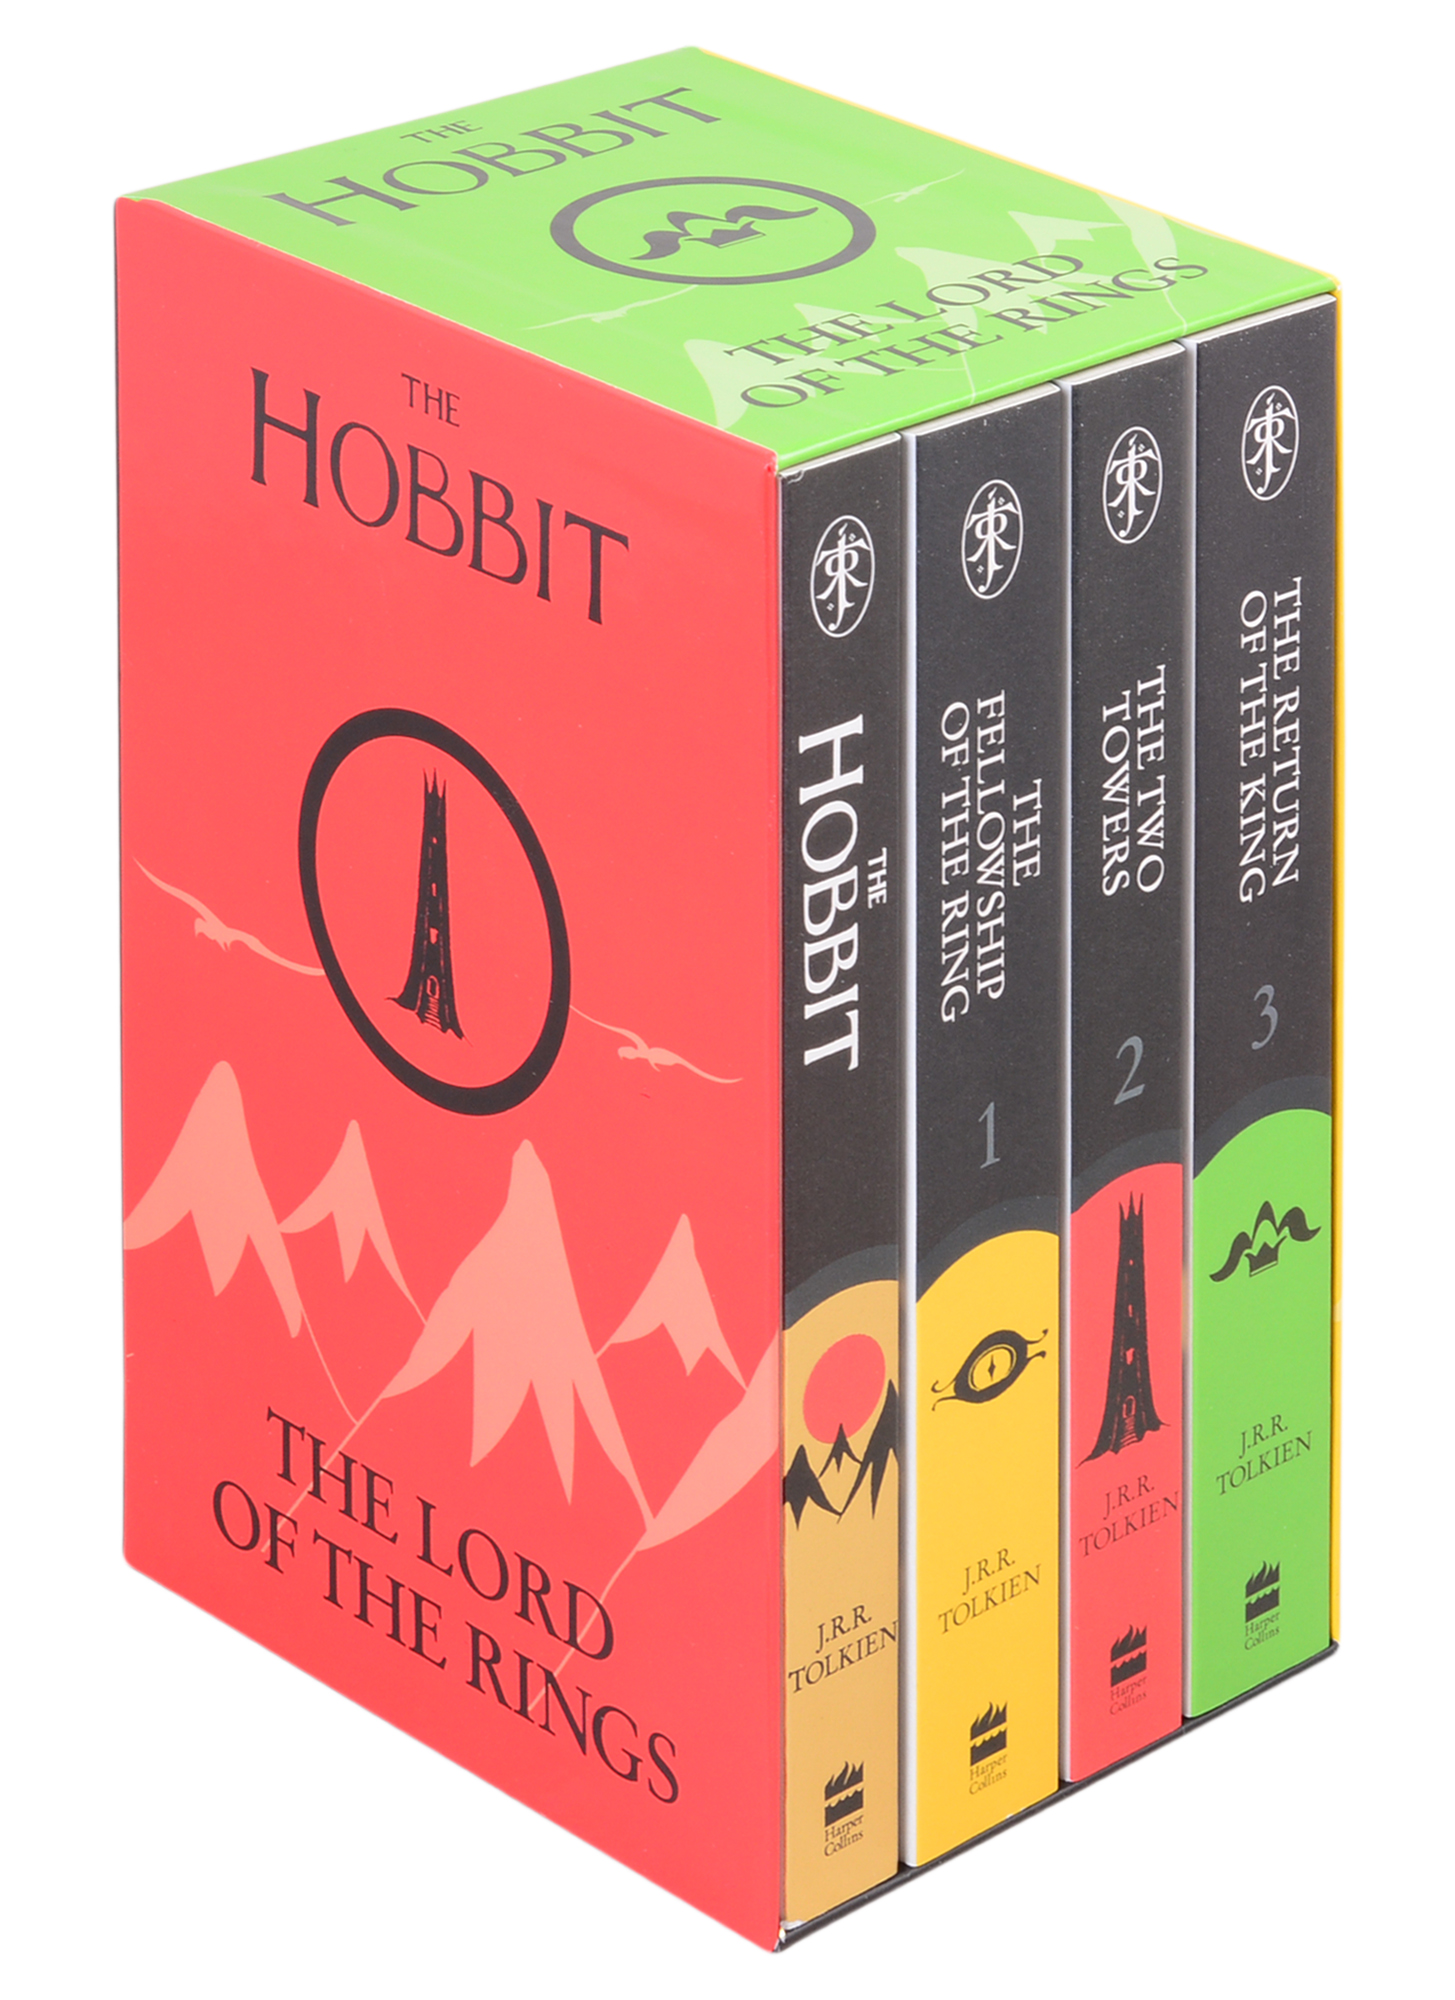 Толкин Джон Рональд Руэл The Hobbit and the Lord of the Rings: Gift Set 4 vol.